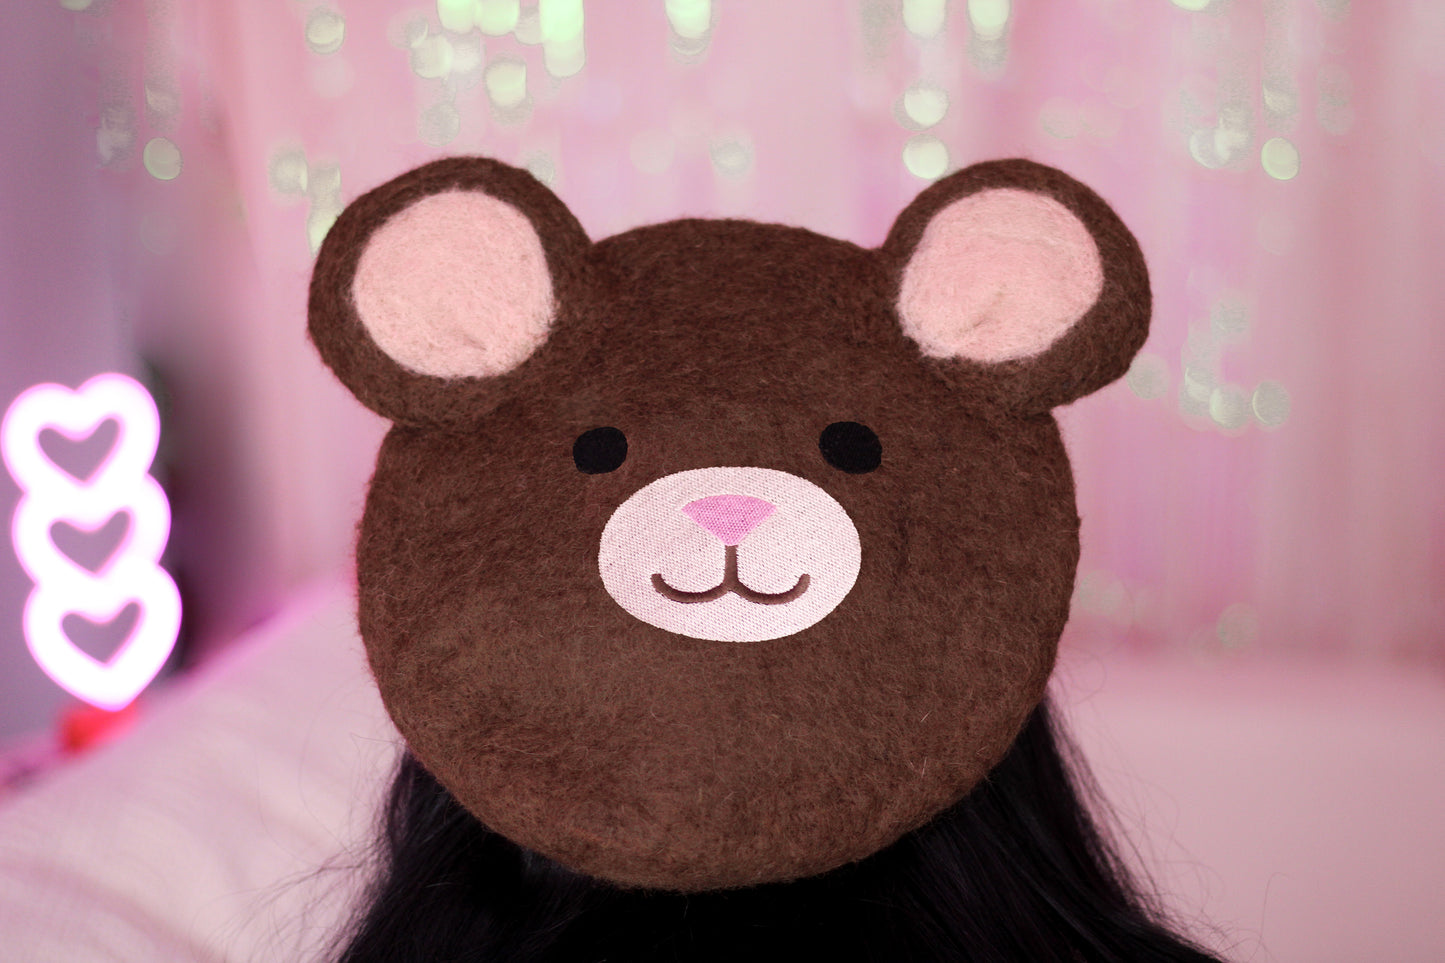 BEAR-ET Embroidered Handmade Beret! *MADE TO ORDER*